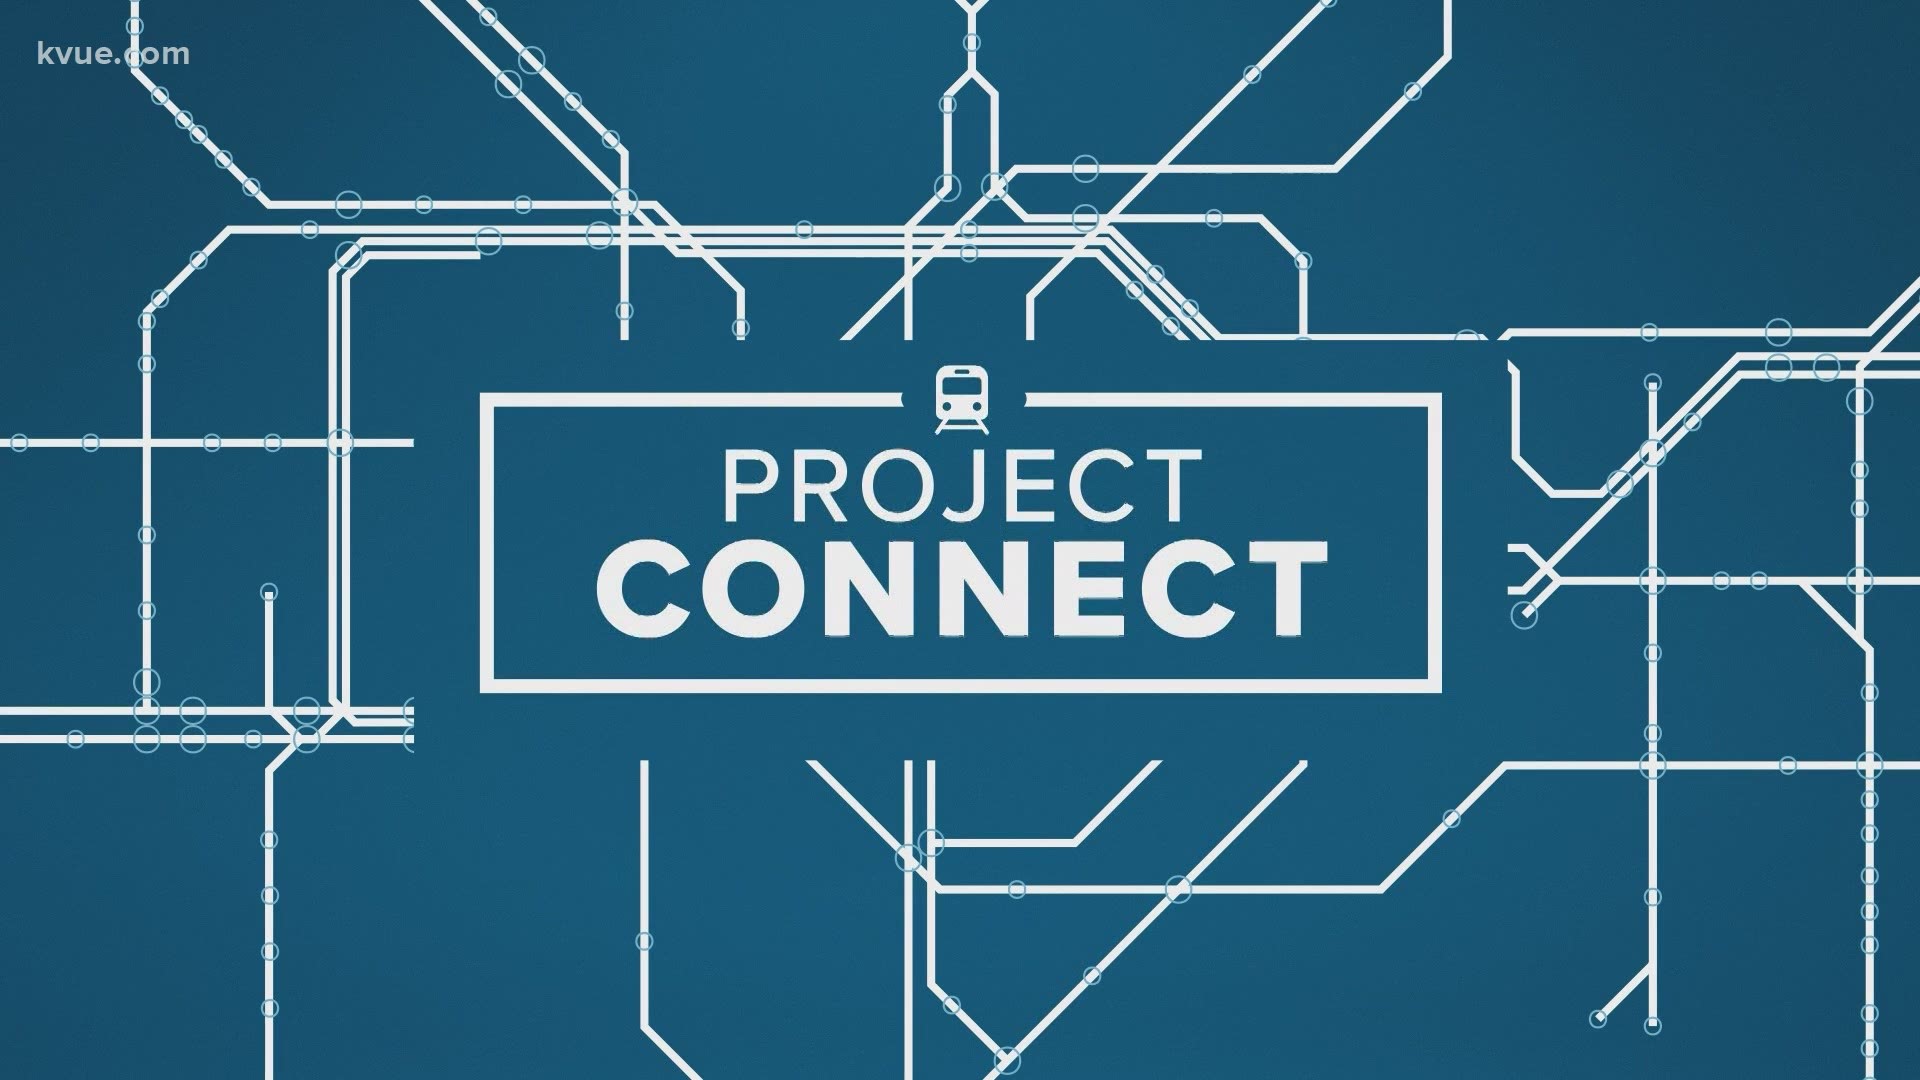 The most expensive part of Project Connect is two light rail lines and an underground transit tunnel, accounting for nearly 82% of the plan's total cost.